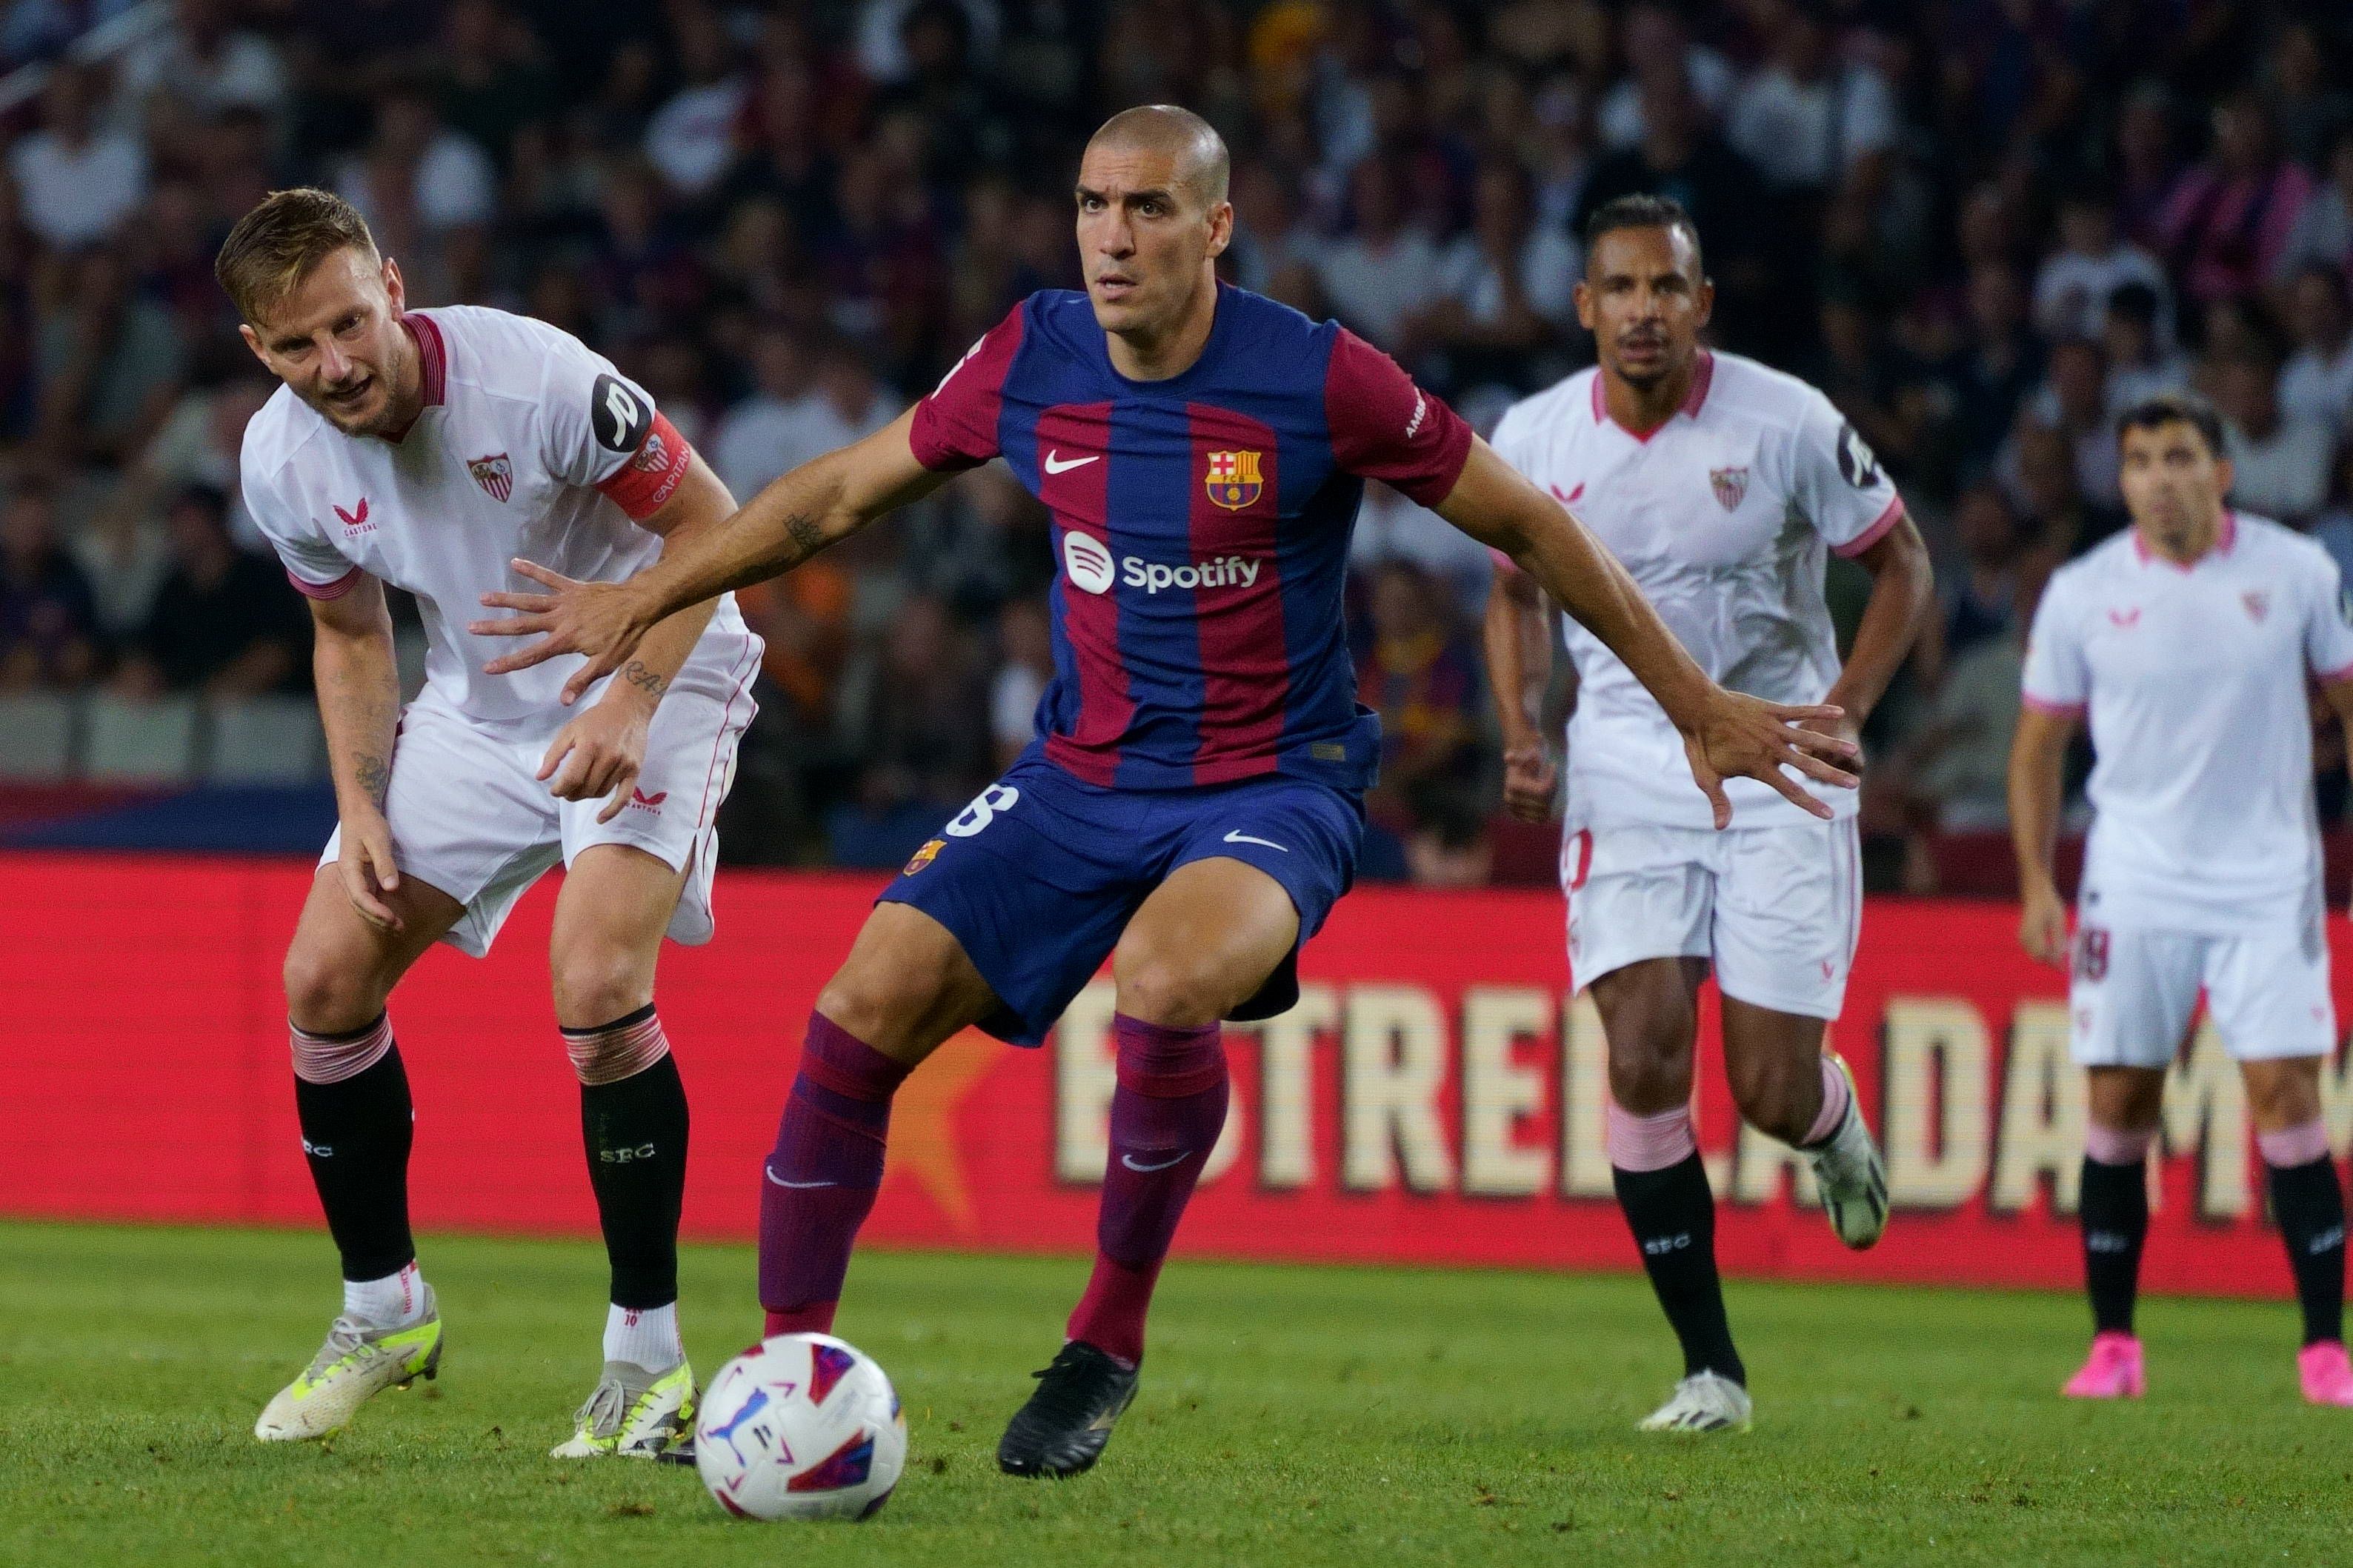 “I couldn’t have asked for more”- Oriol Romeu opens up on time at Barcelona